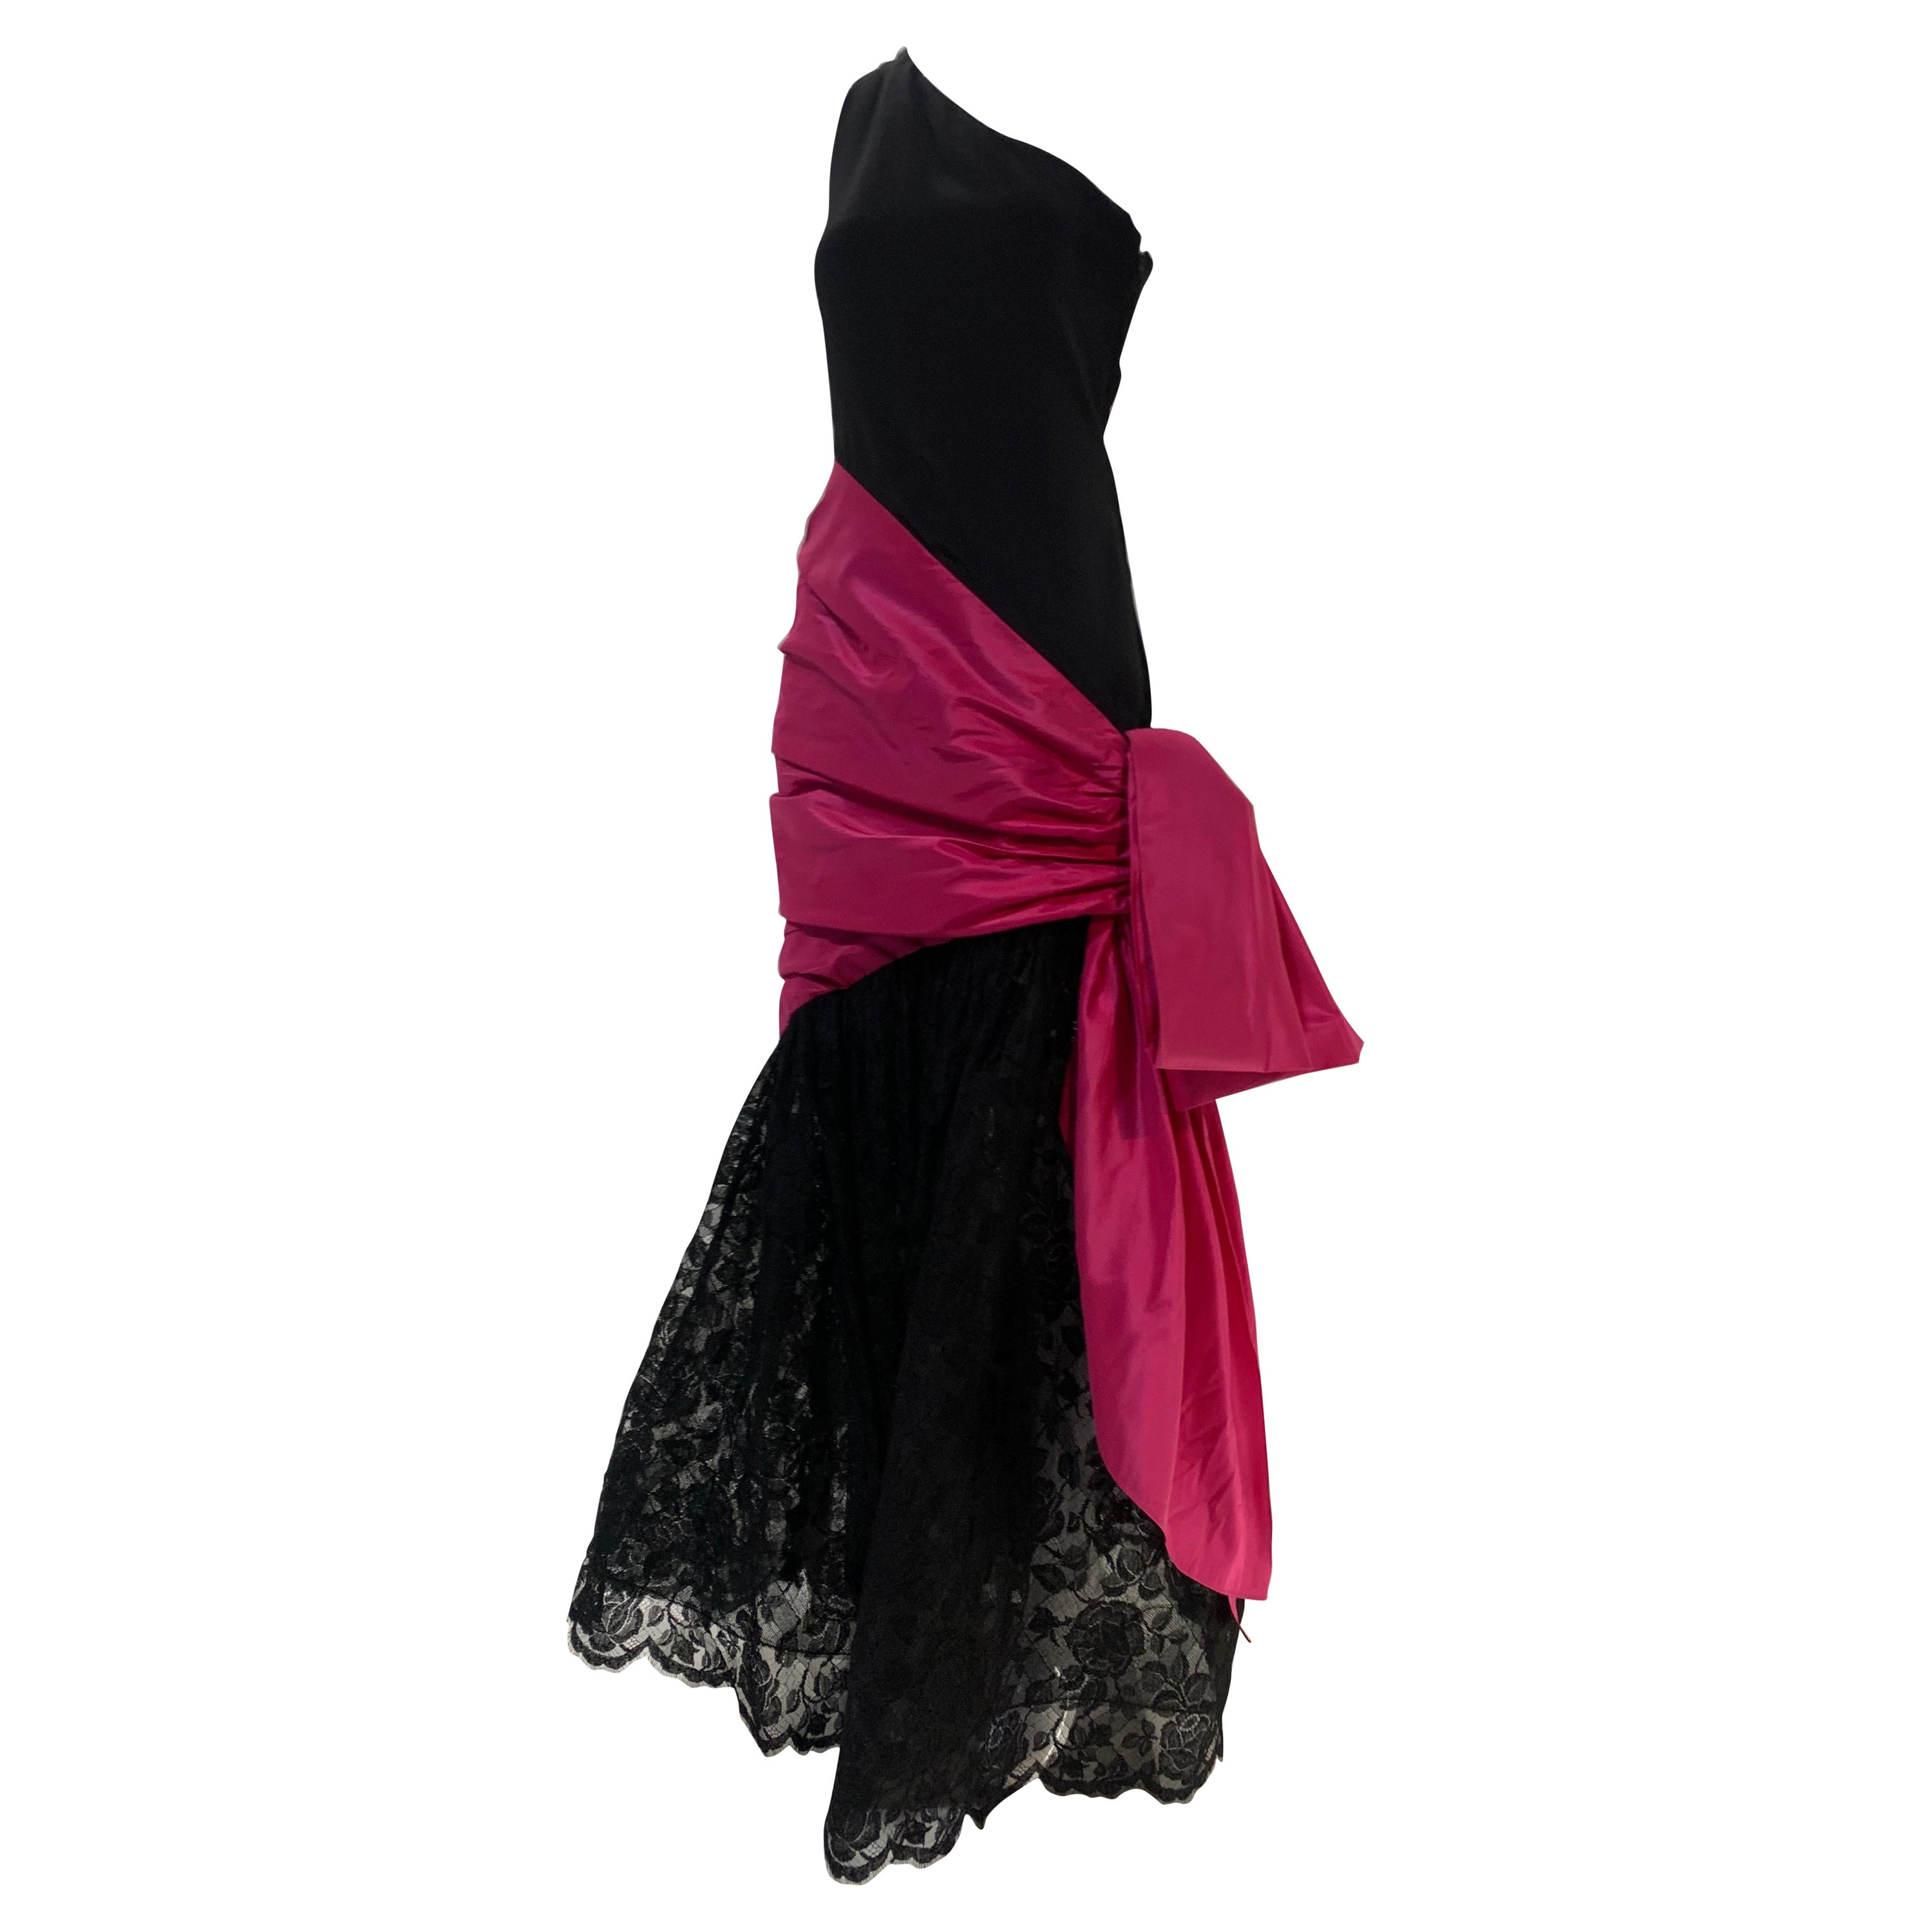 1980 Bill Blass Black Silk Crepe One-Shoulder Gown w/ Lace Skirt and Fuchsia Bow For Sale